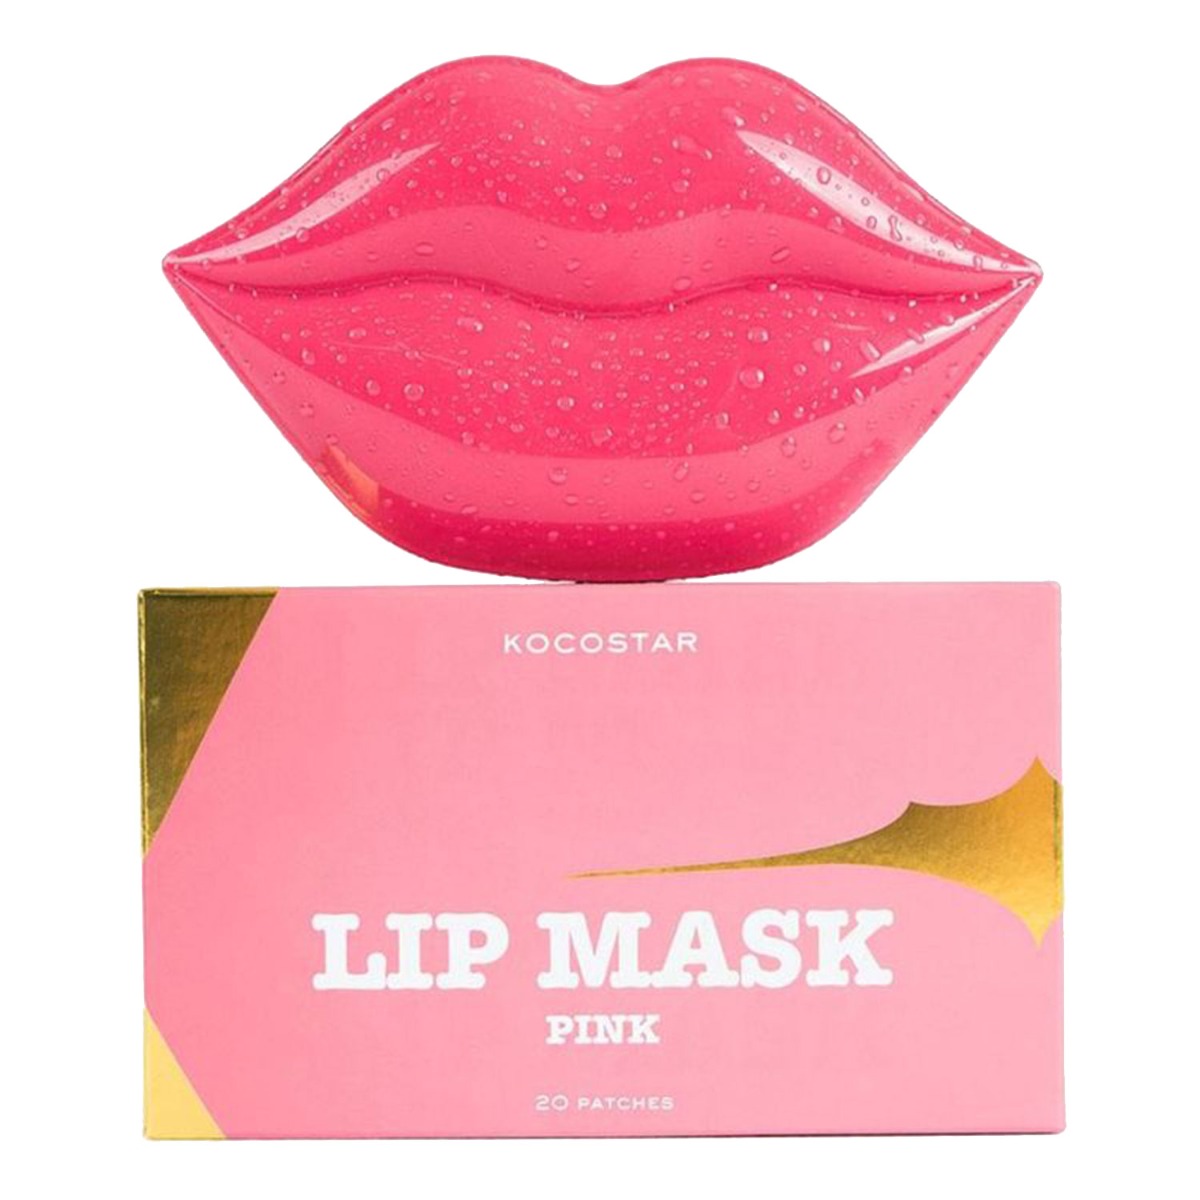 Kocostar  Lip Mask Pink-Firming & Radiance, 20 Patches